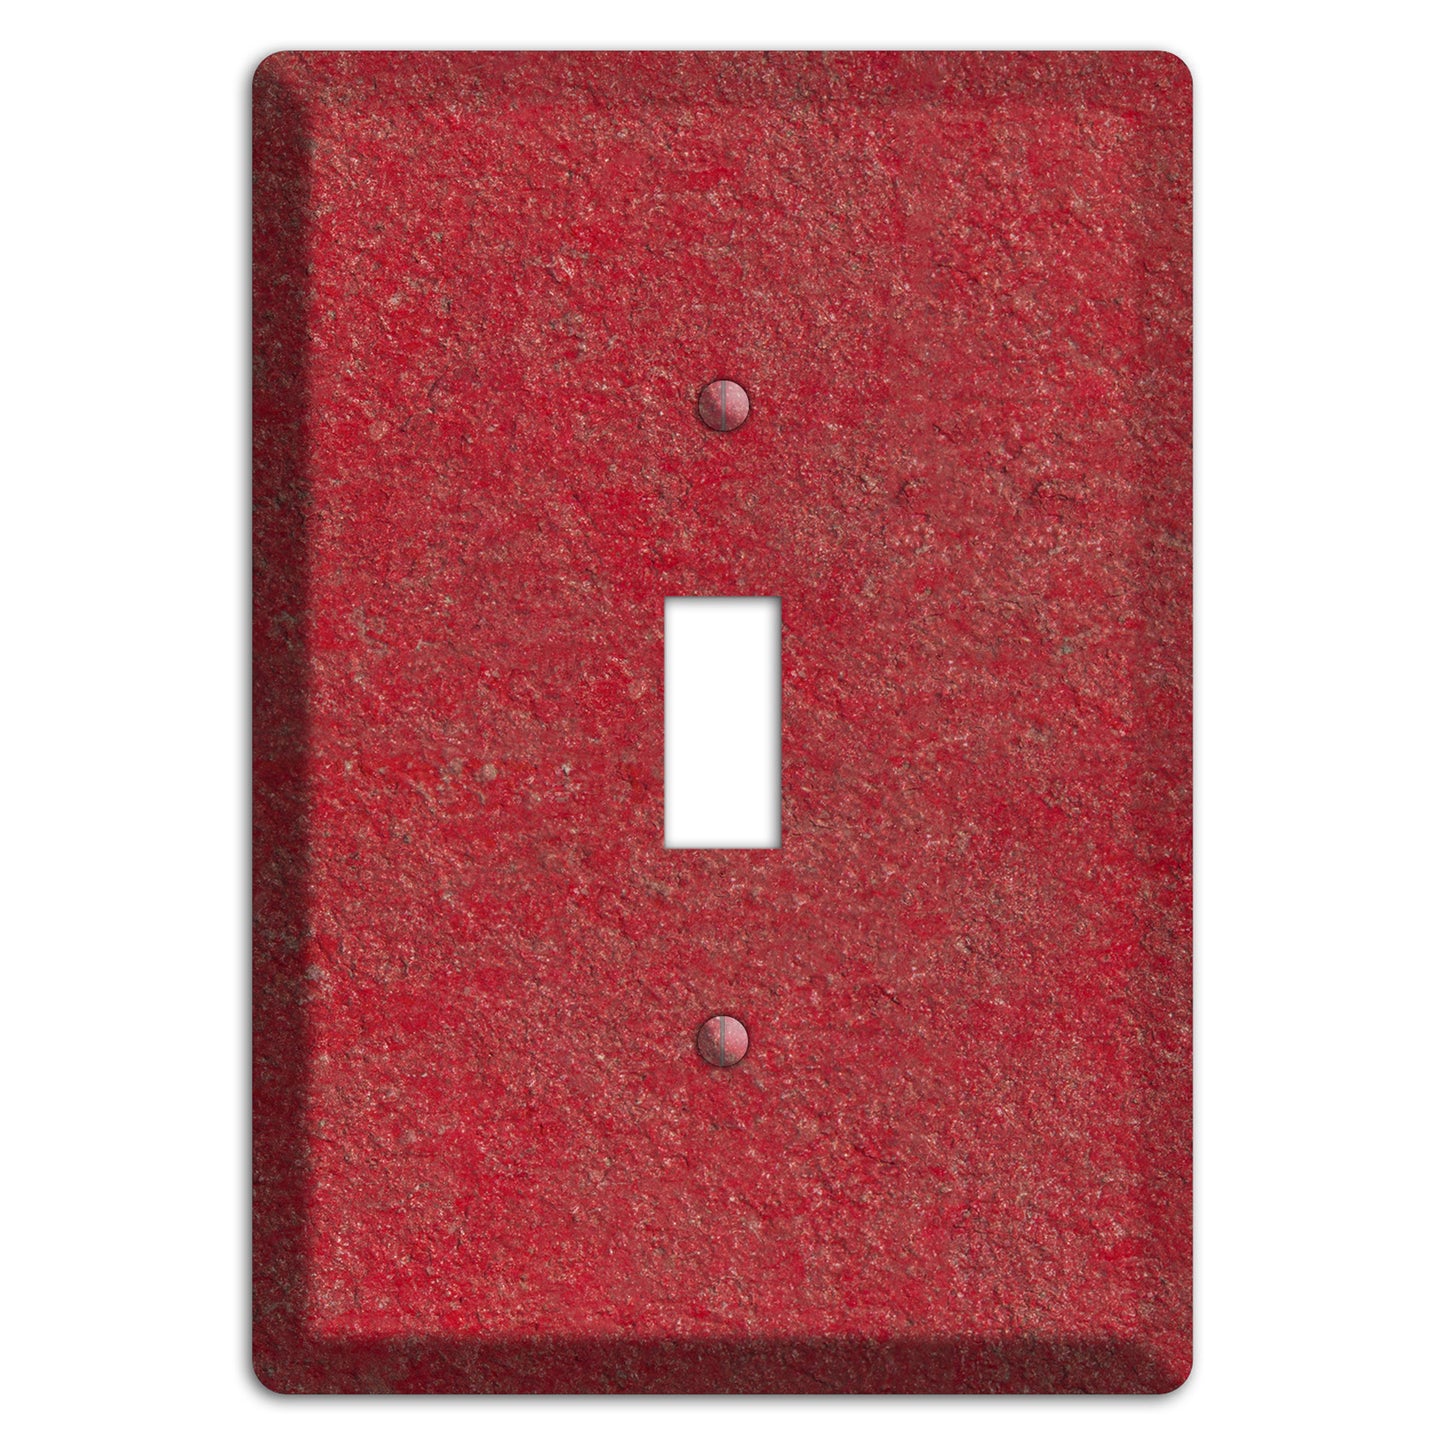 Stucco Red Cover Plates